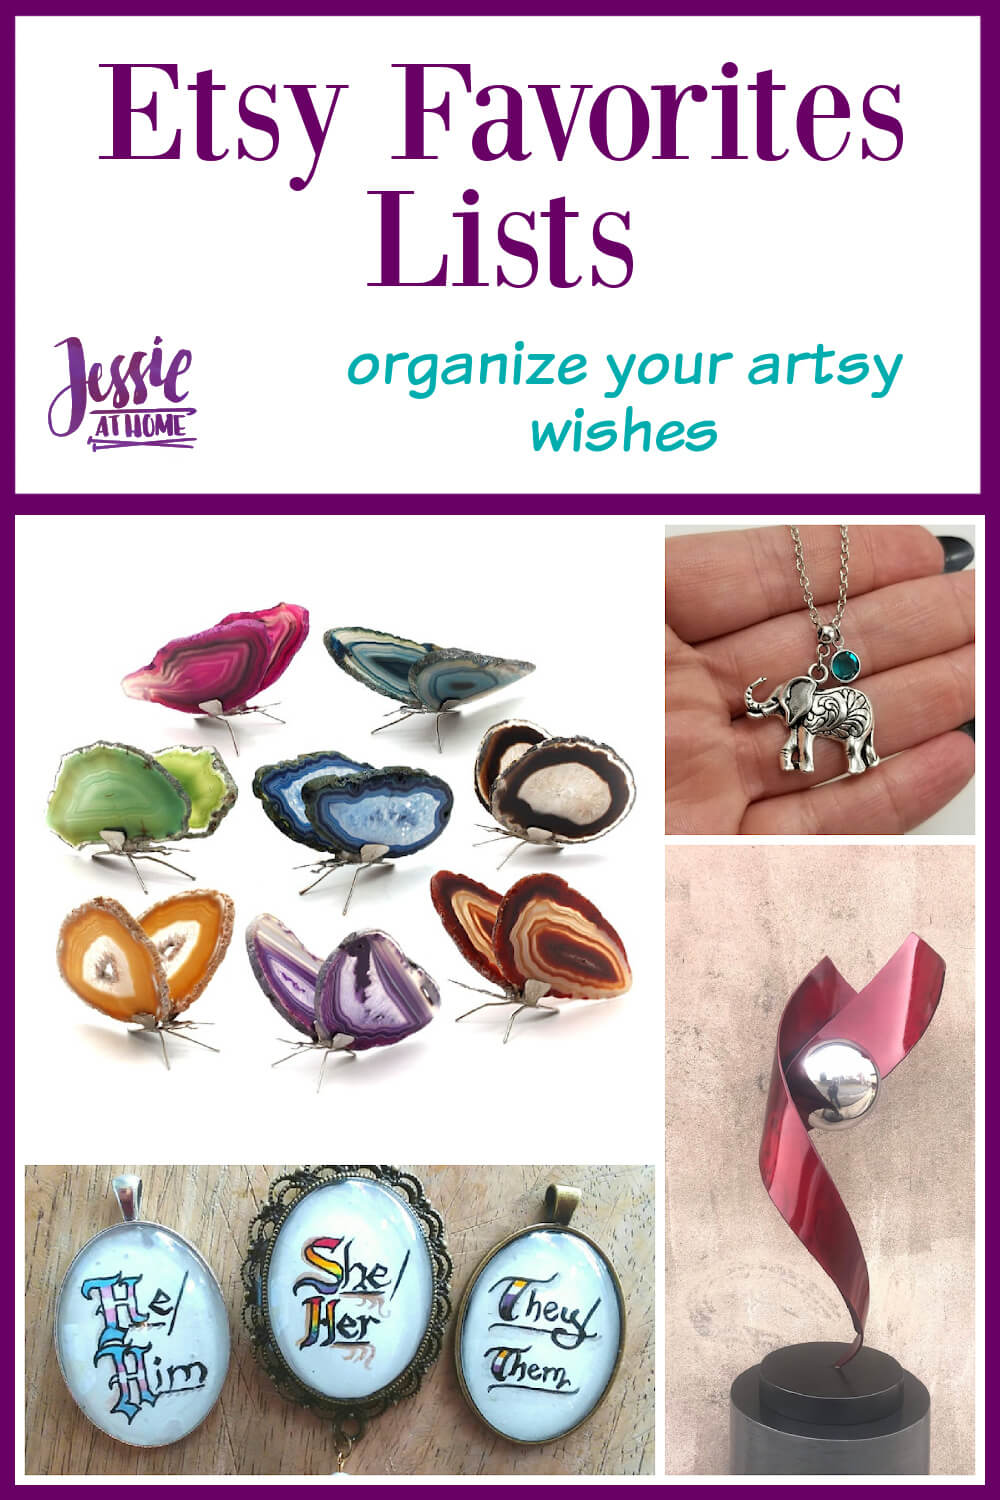 Etsy Favorites Lists - organize your artsy wishes